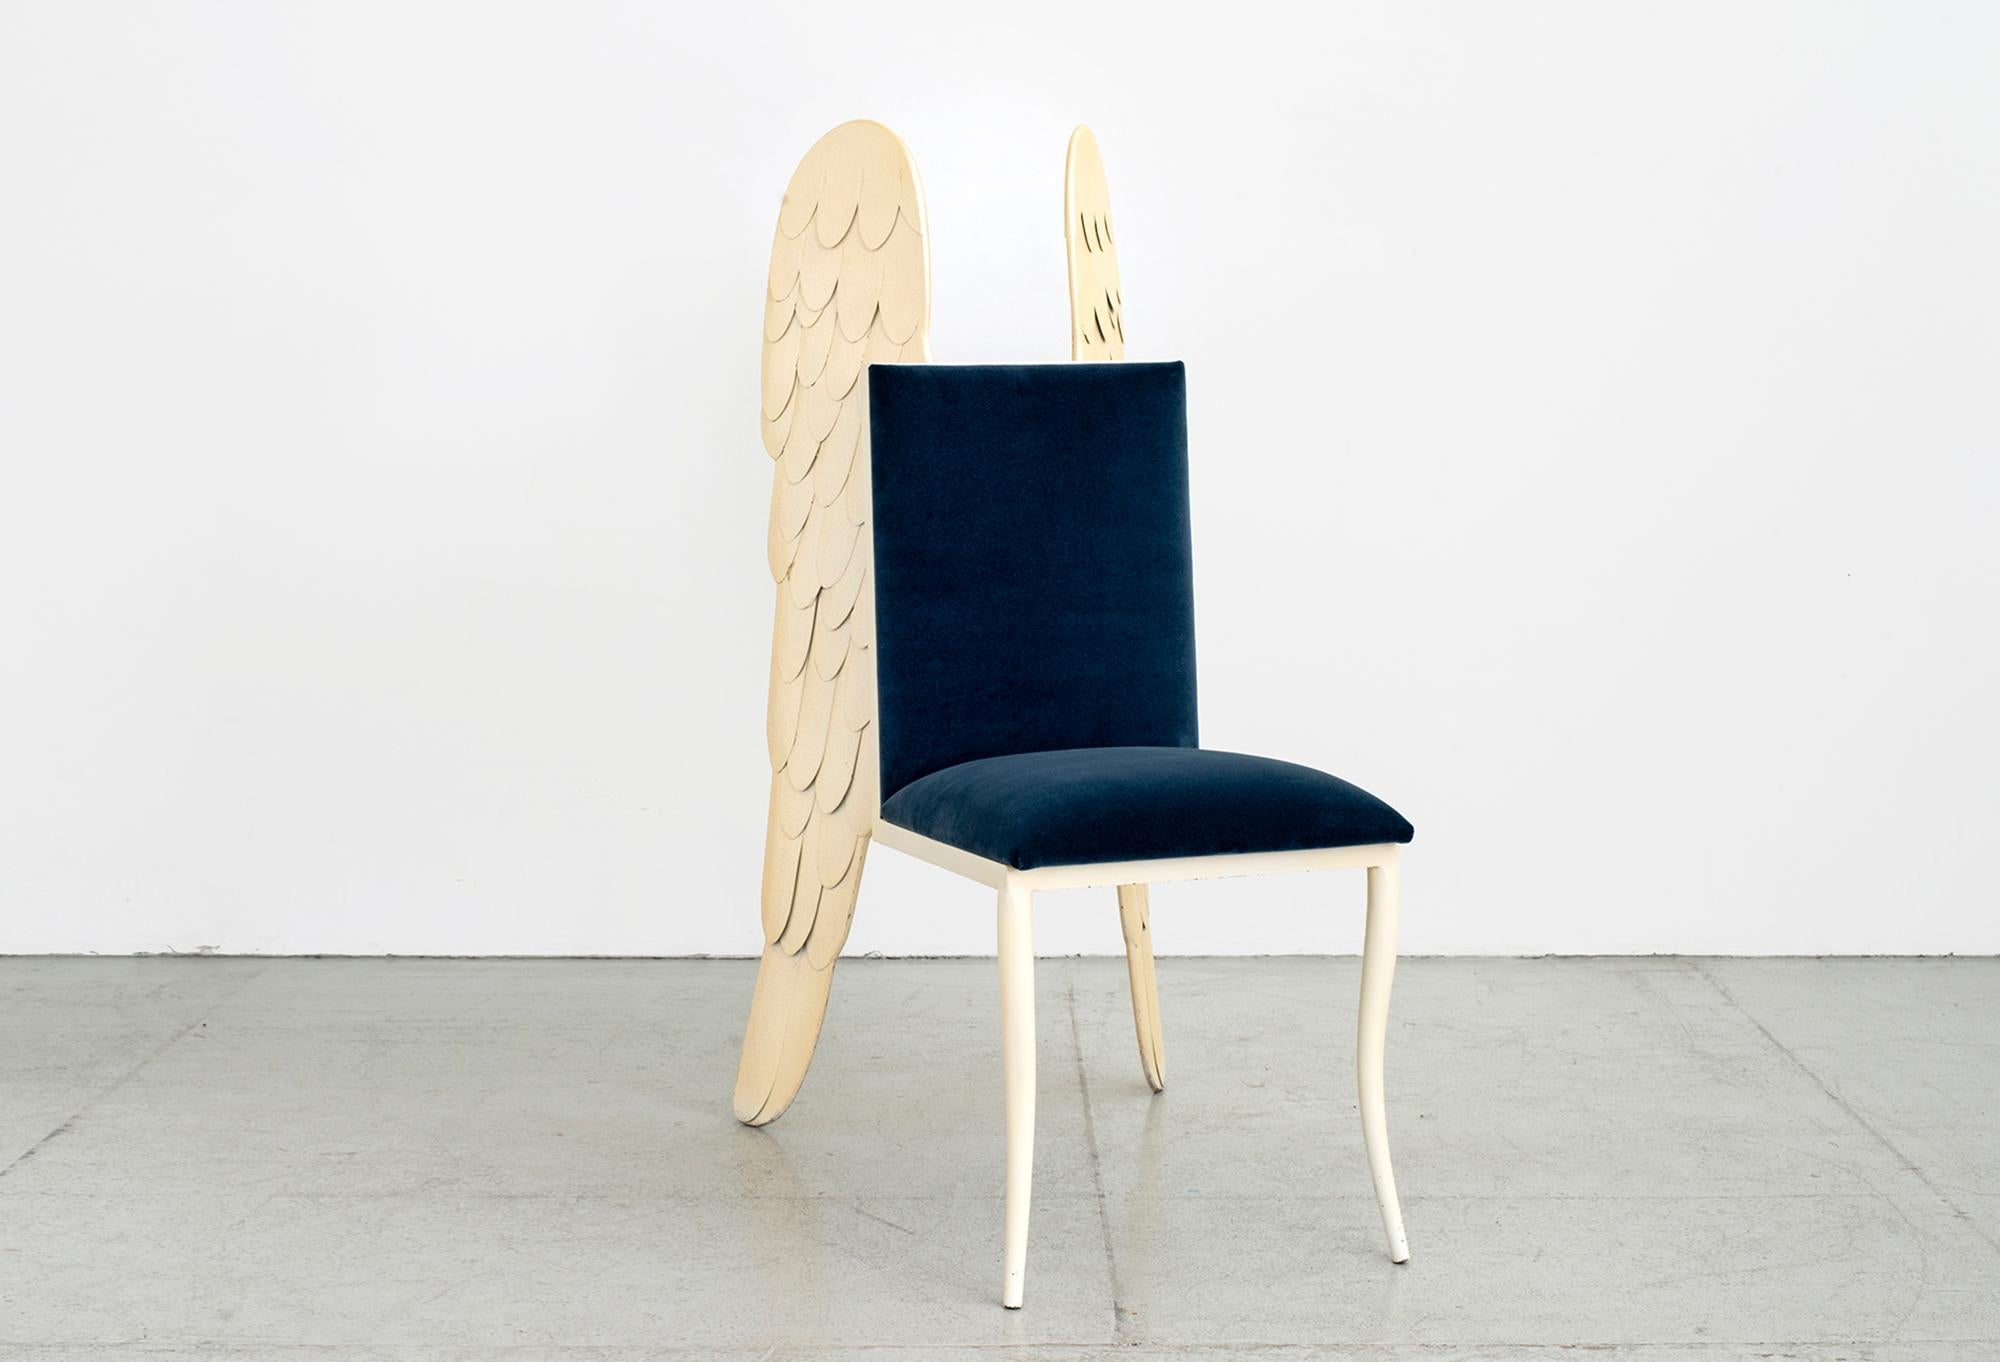 1980s Italian sculpture chair with carved angel wings and floating seat.
Enameled metal intricately designed - wings serve as the back 2 legs of the chair. 
Original finish with newly upholstered blue mohair seat.

Great piece for a corner in